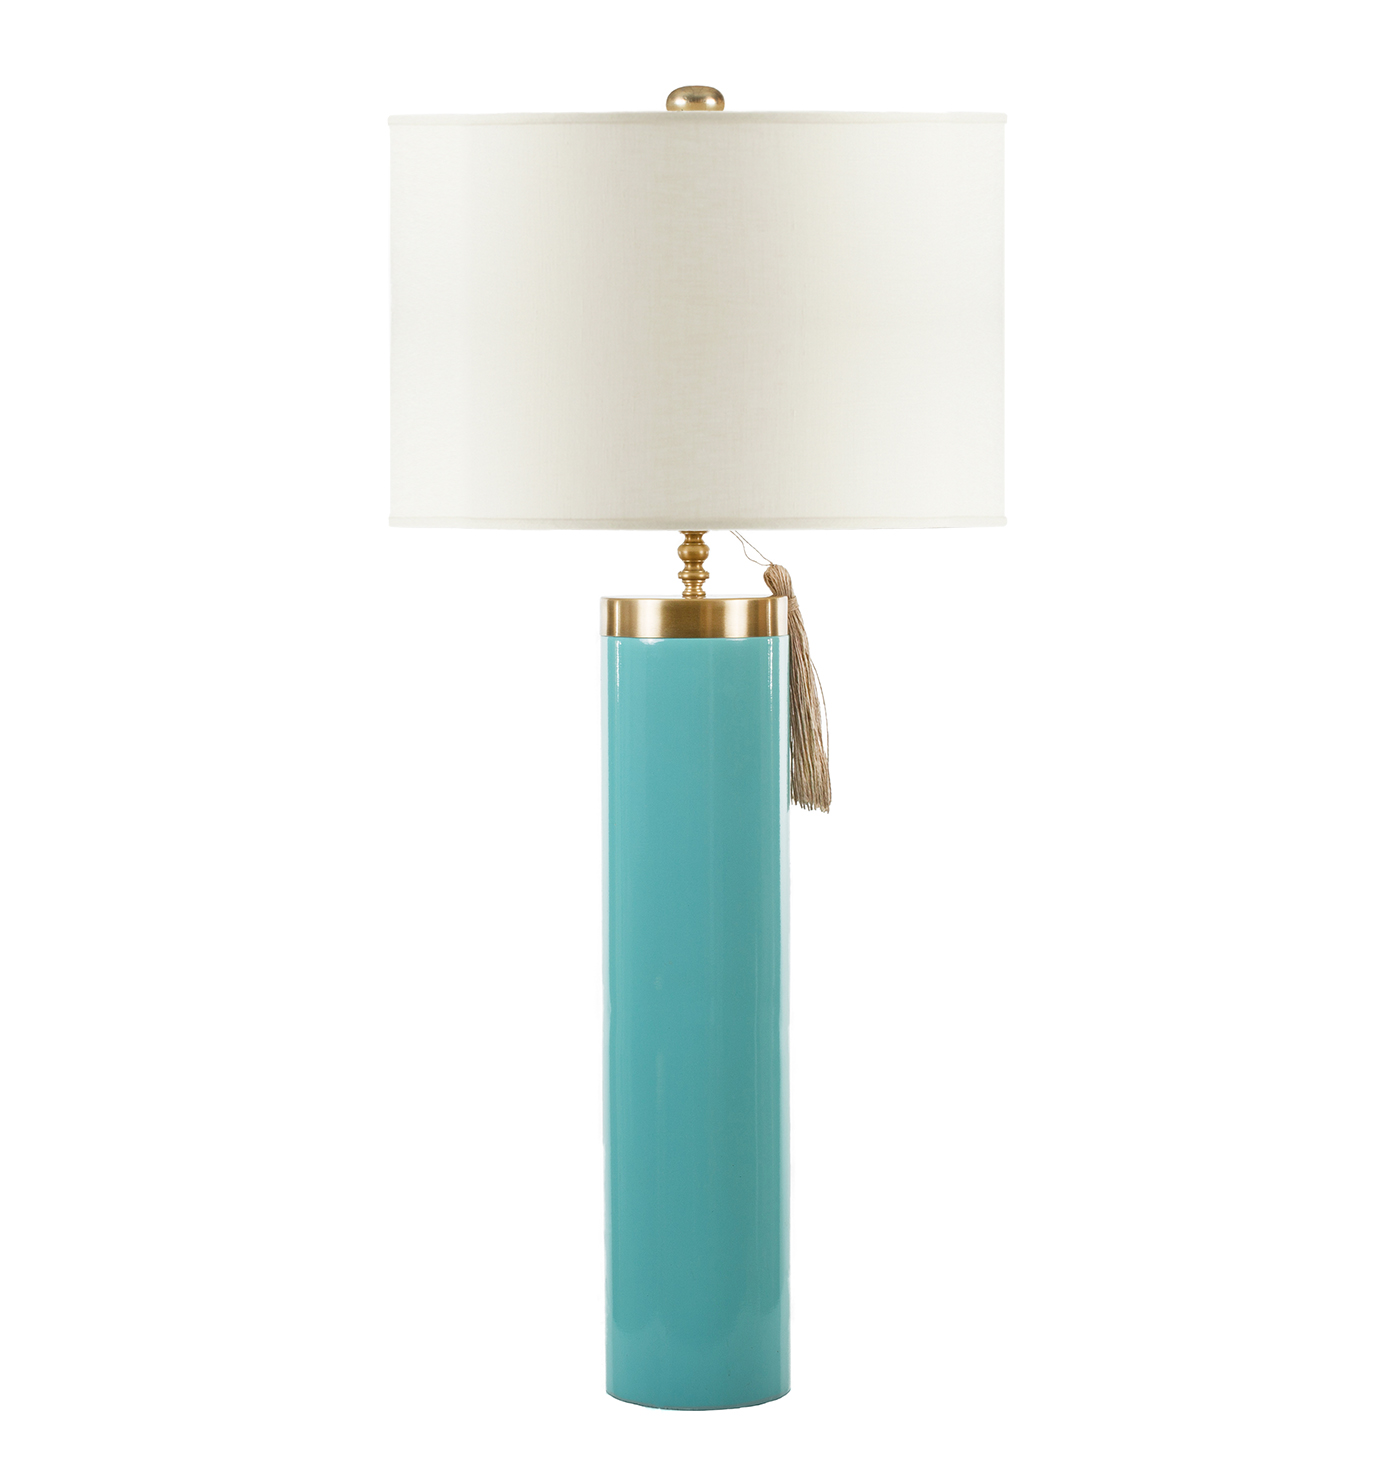 Patricia-Table-Lamp_Turquoise-Powder-Coated_Sugar-Linen-Shade.jpg